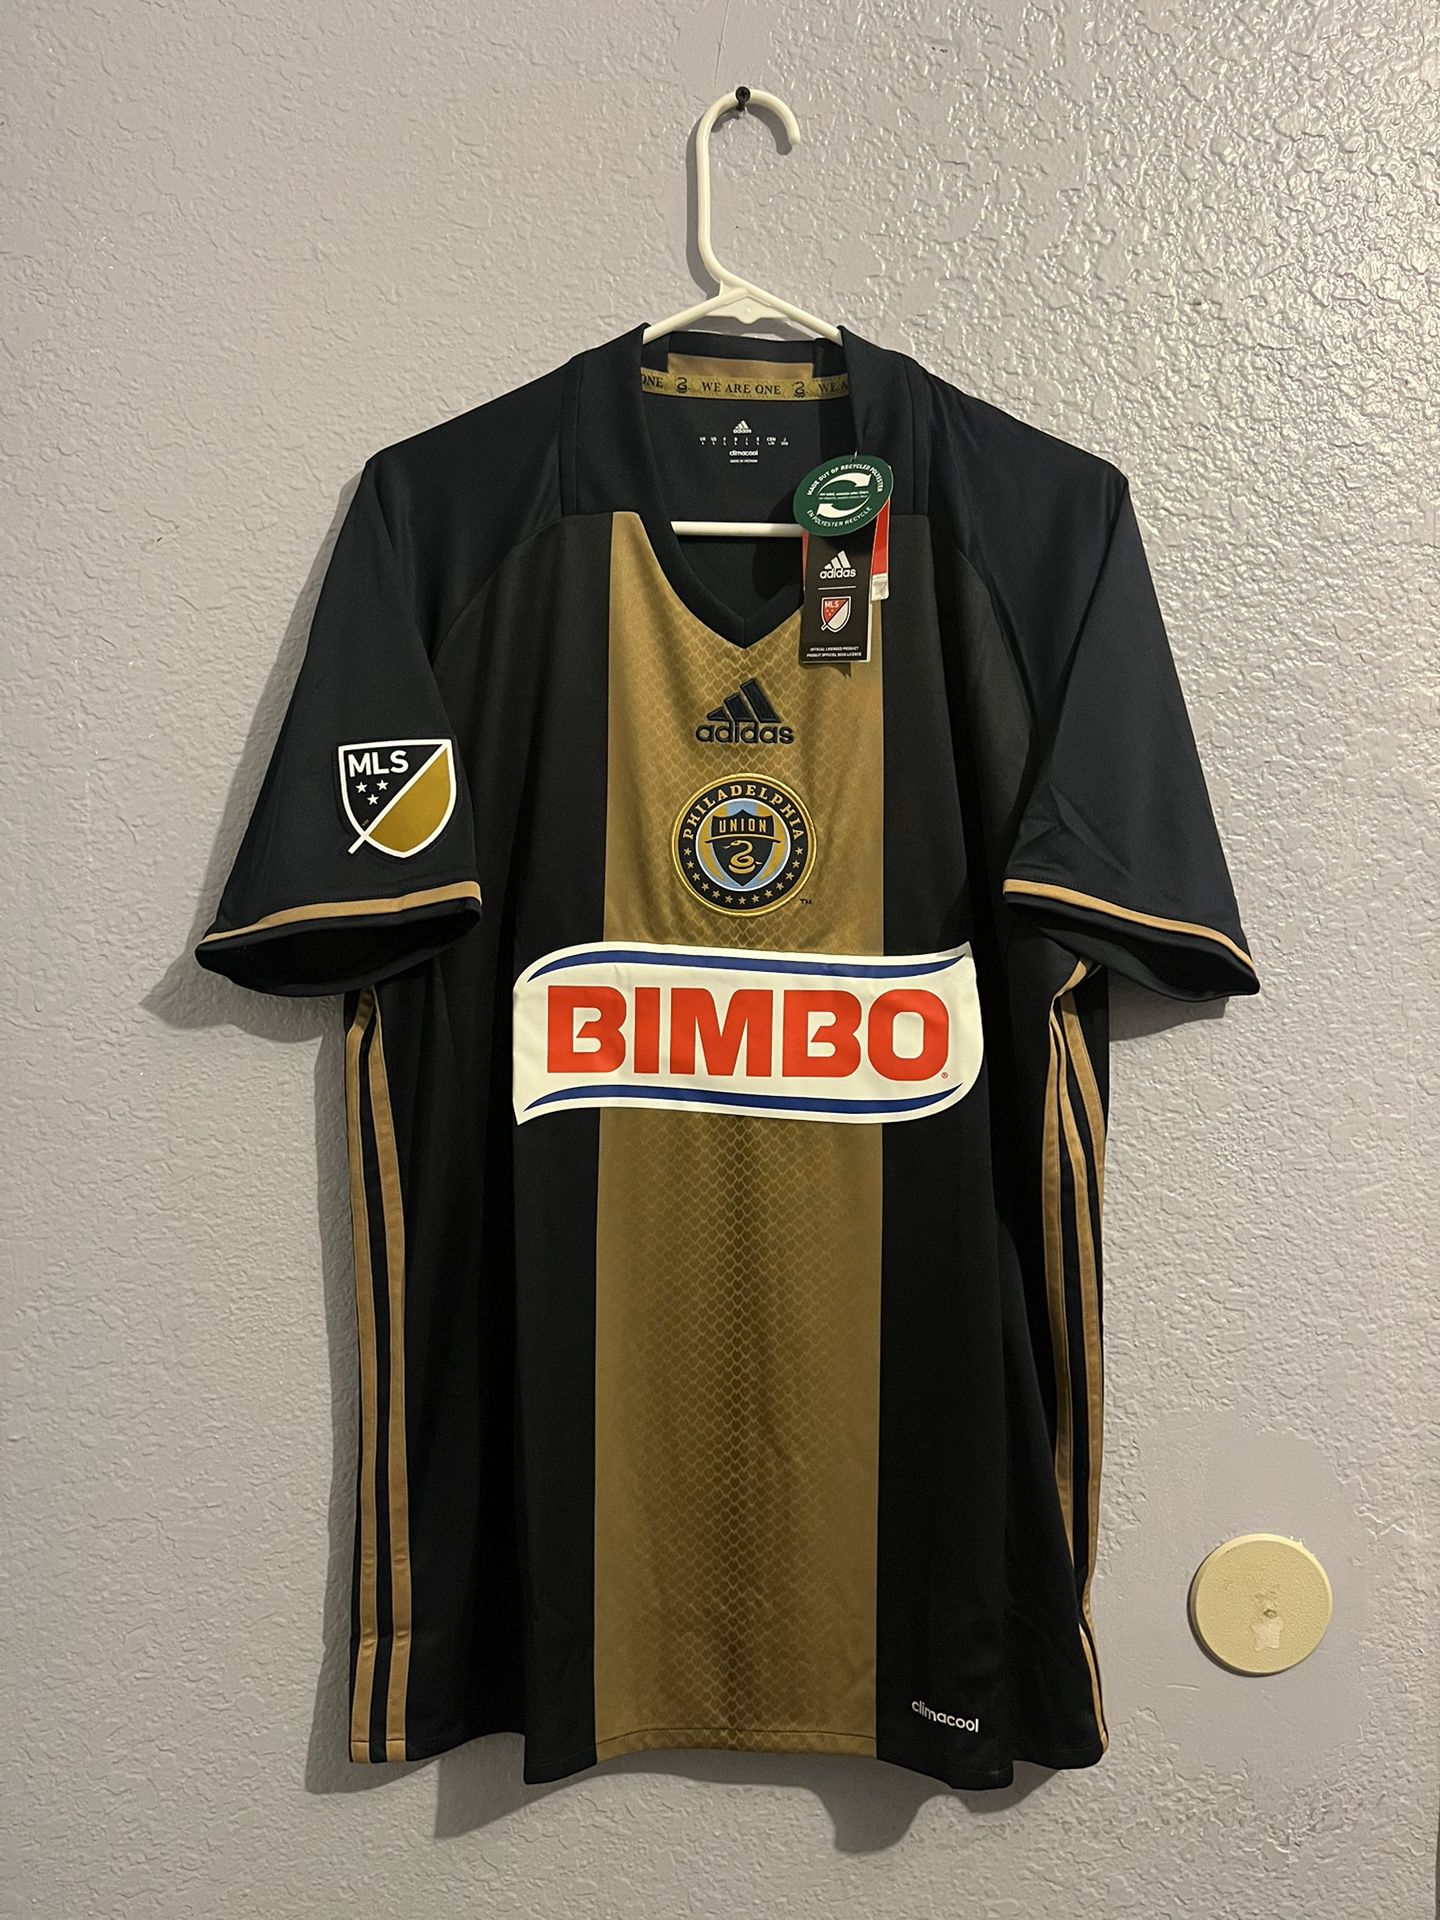 Philadelphia Union 2016-17 Home Jersey Large for Sale in Windsor Hills, CA  - OfferUp